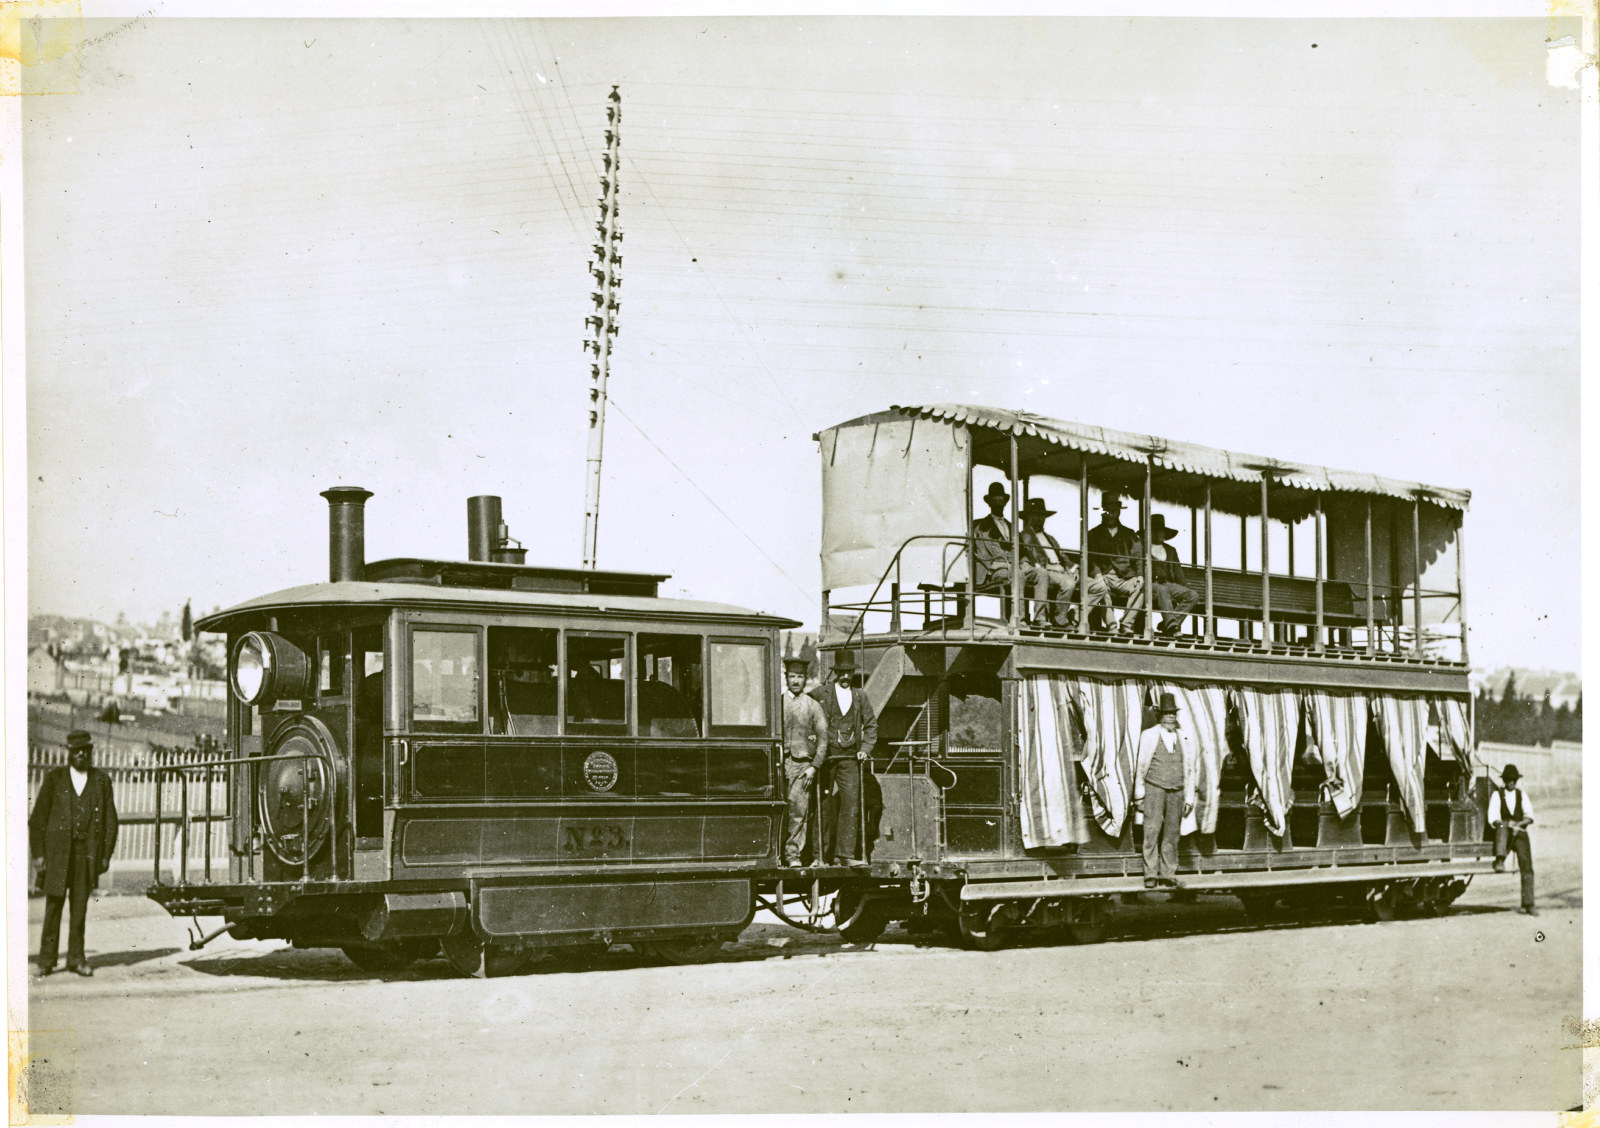 Steam tram showing motor and trailer car